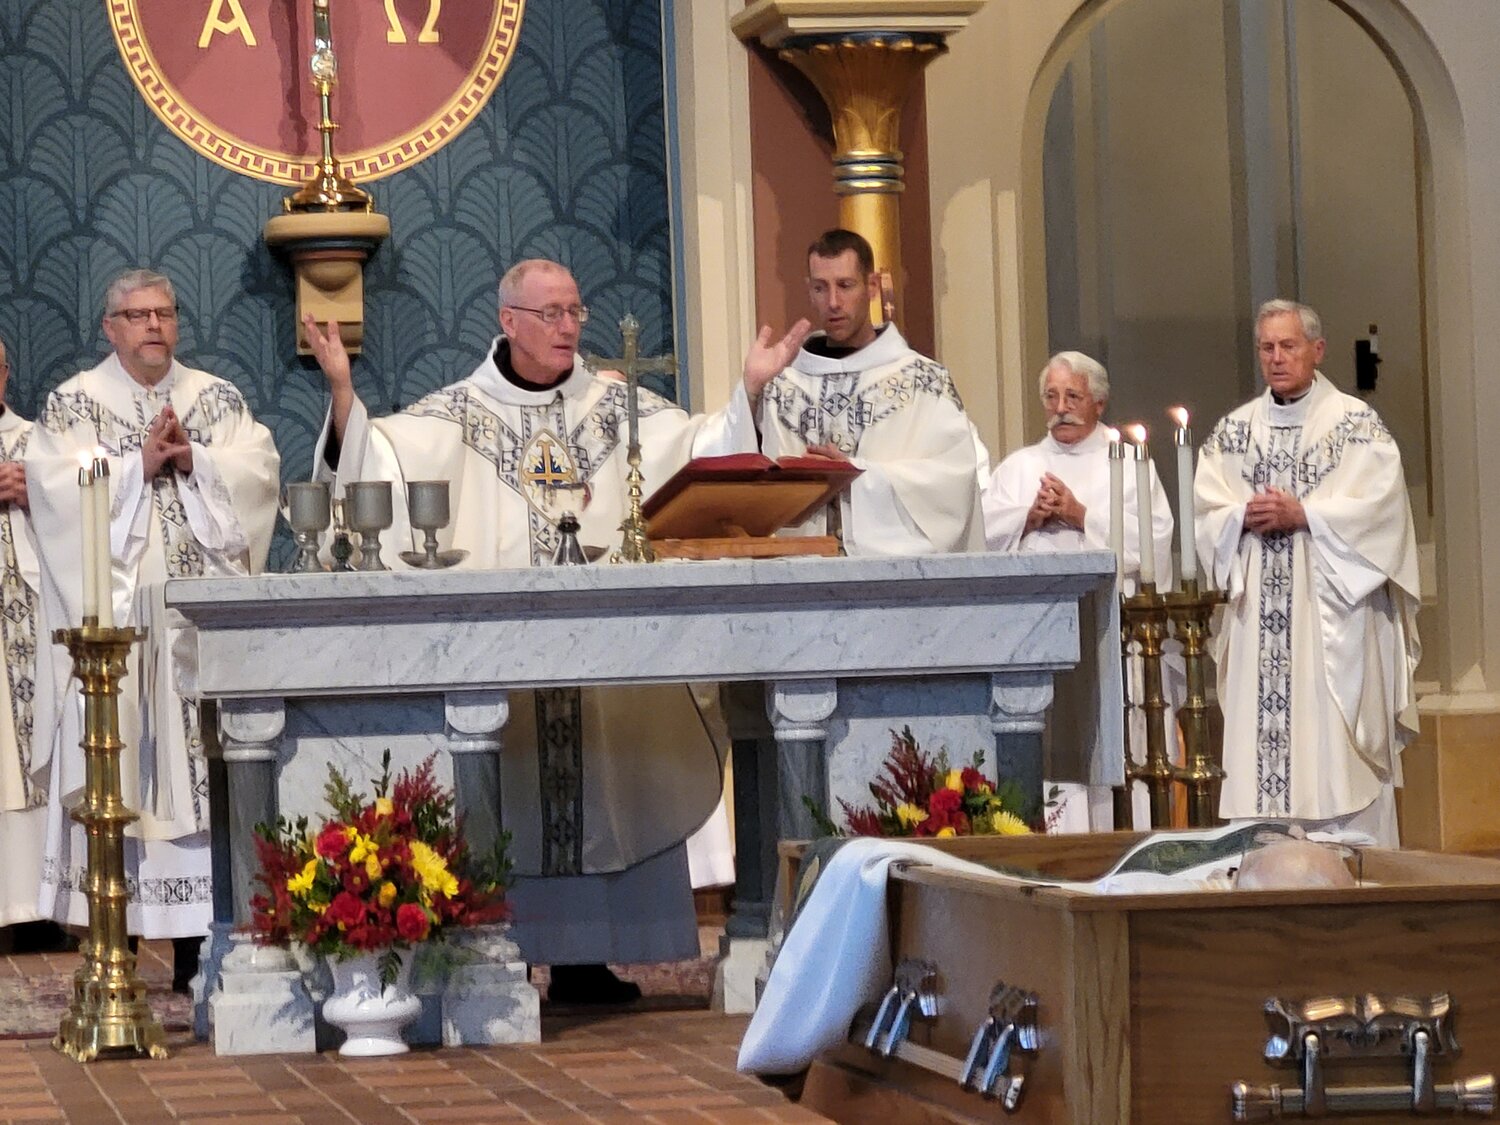 Benedictine Abbot Benedict Neenan of Conception Abbey and concelebrating priests pray the Eucharistic Prayer at the Funeral Mass for Father Clarence Wiederholt, a retired priest of the Jefferson City diocese, on Nov. 3 in the Basilica of the Immaculate Conception at the abbey.